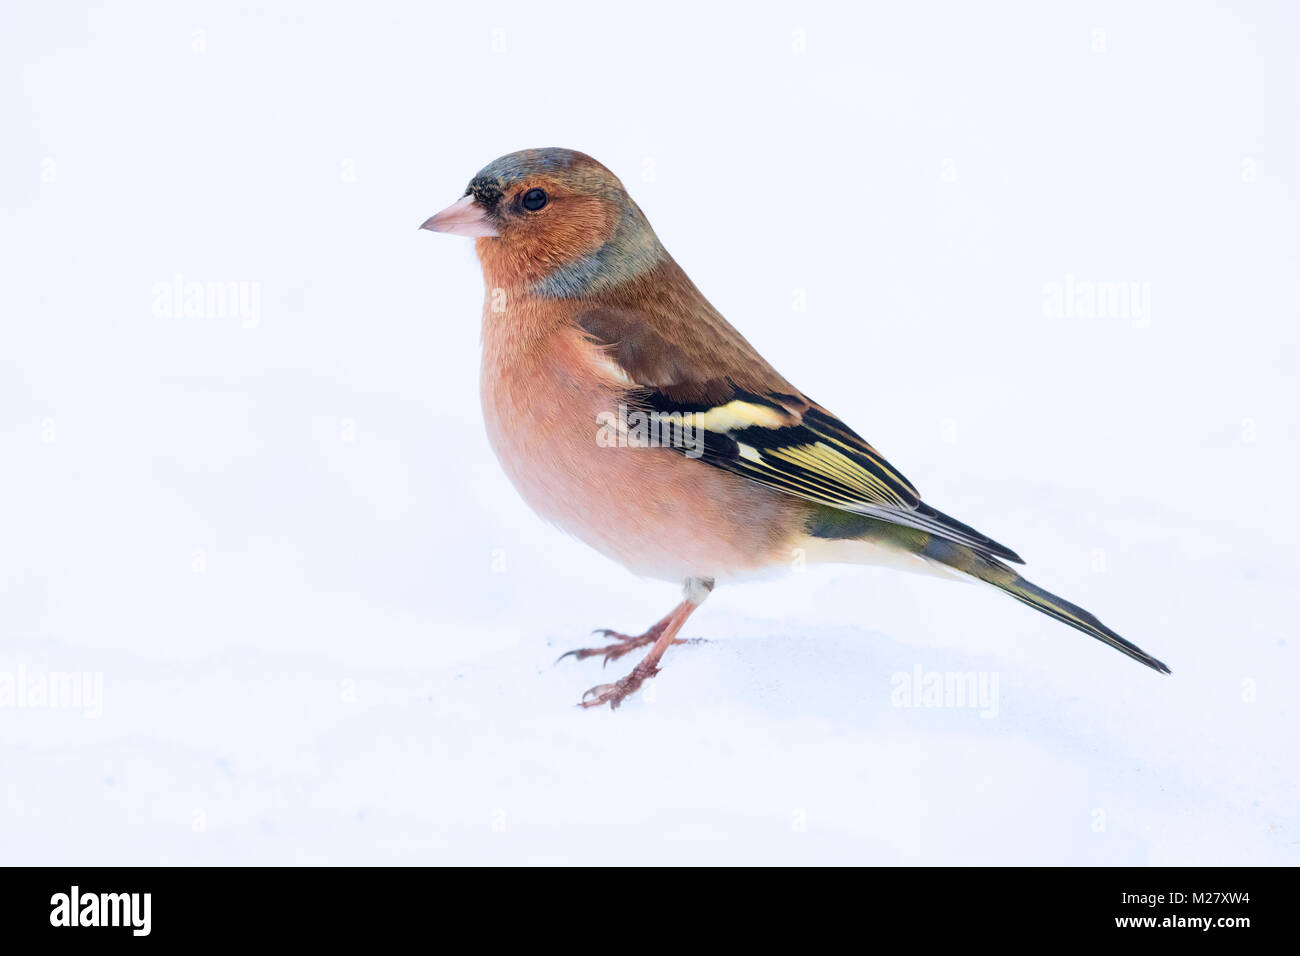 Common Chaffinch (Fringilla coelebs), adult male in winter plumage standing in the snow Stock Photo